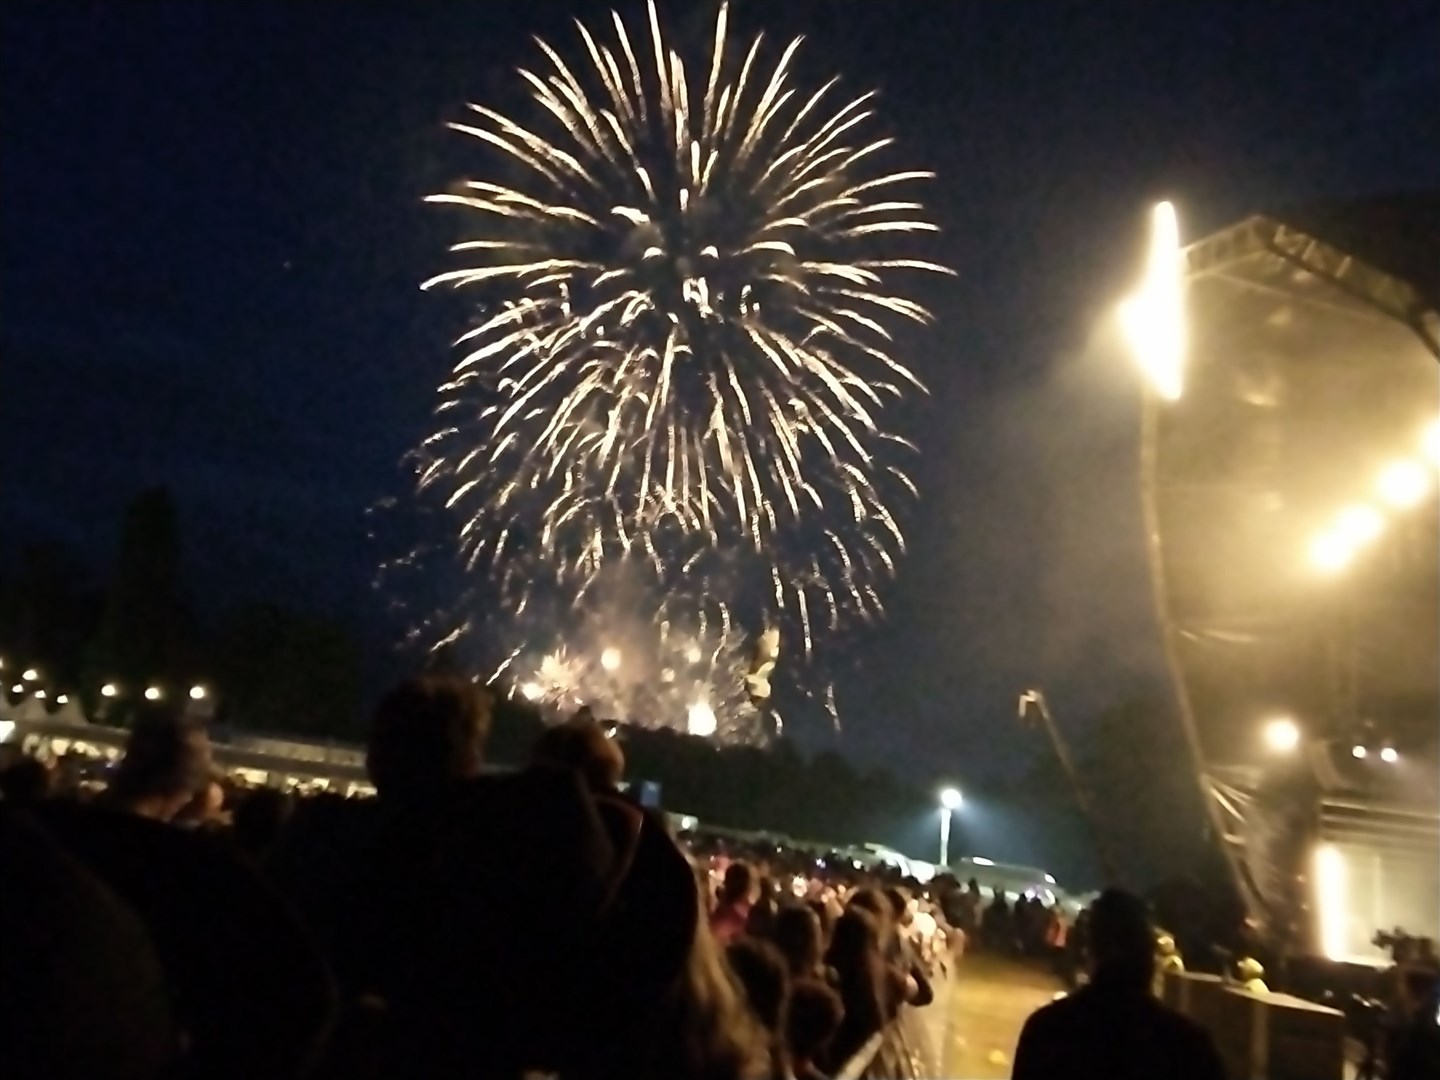 Fireworks bringing Belladrum to a close for this year.